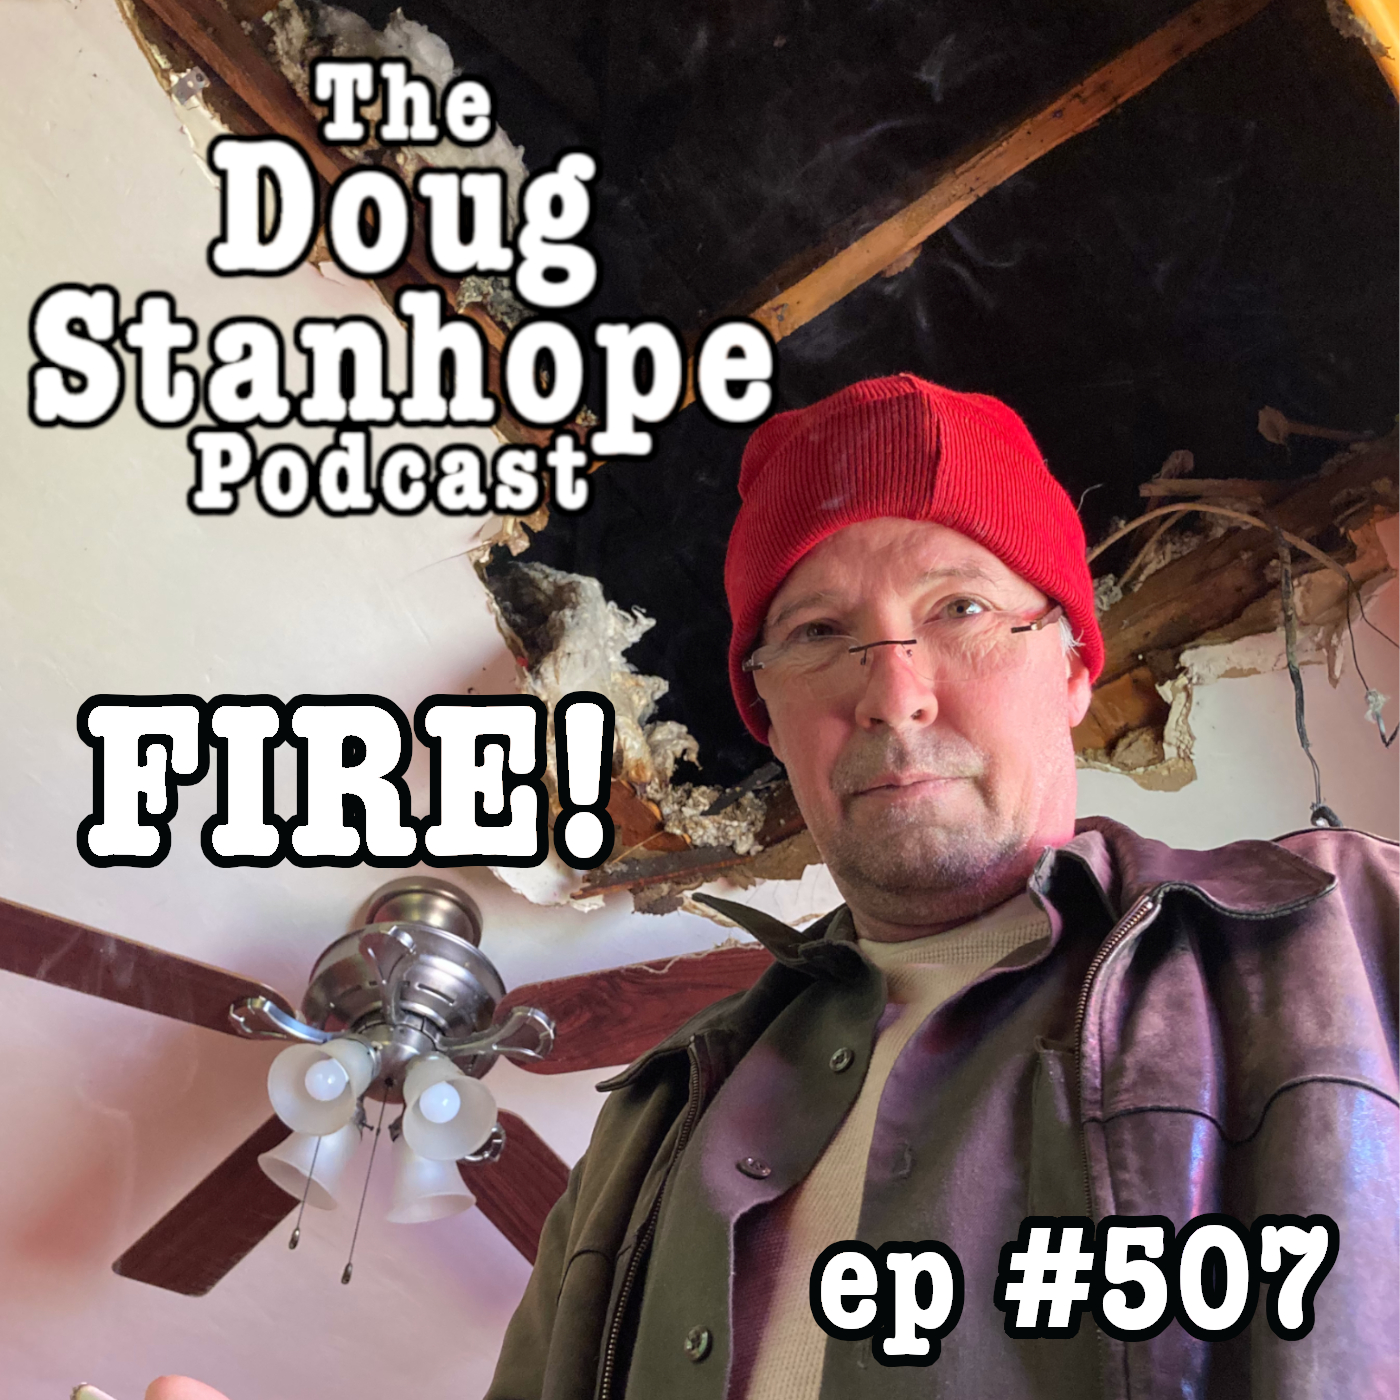 Ep.#507: ”FIRE!”